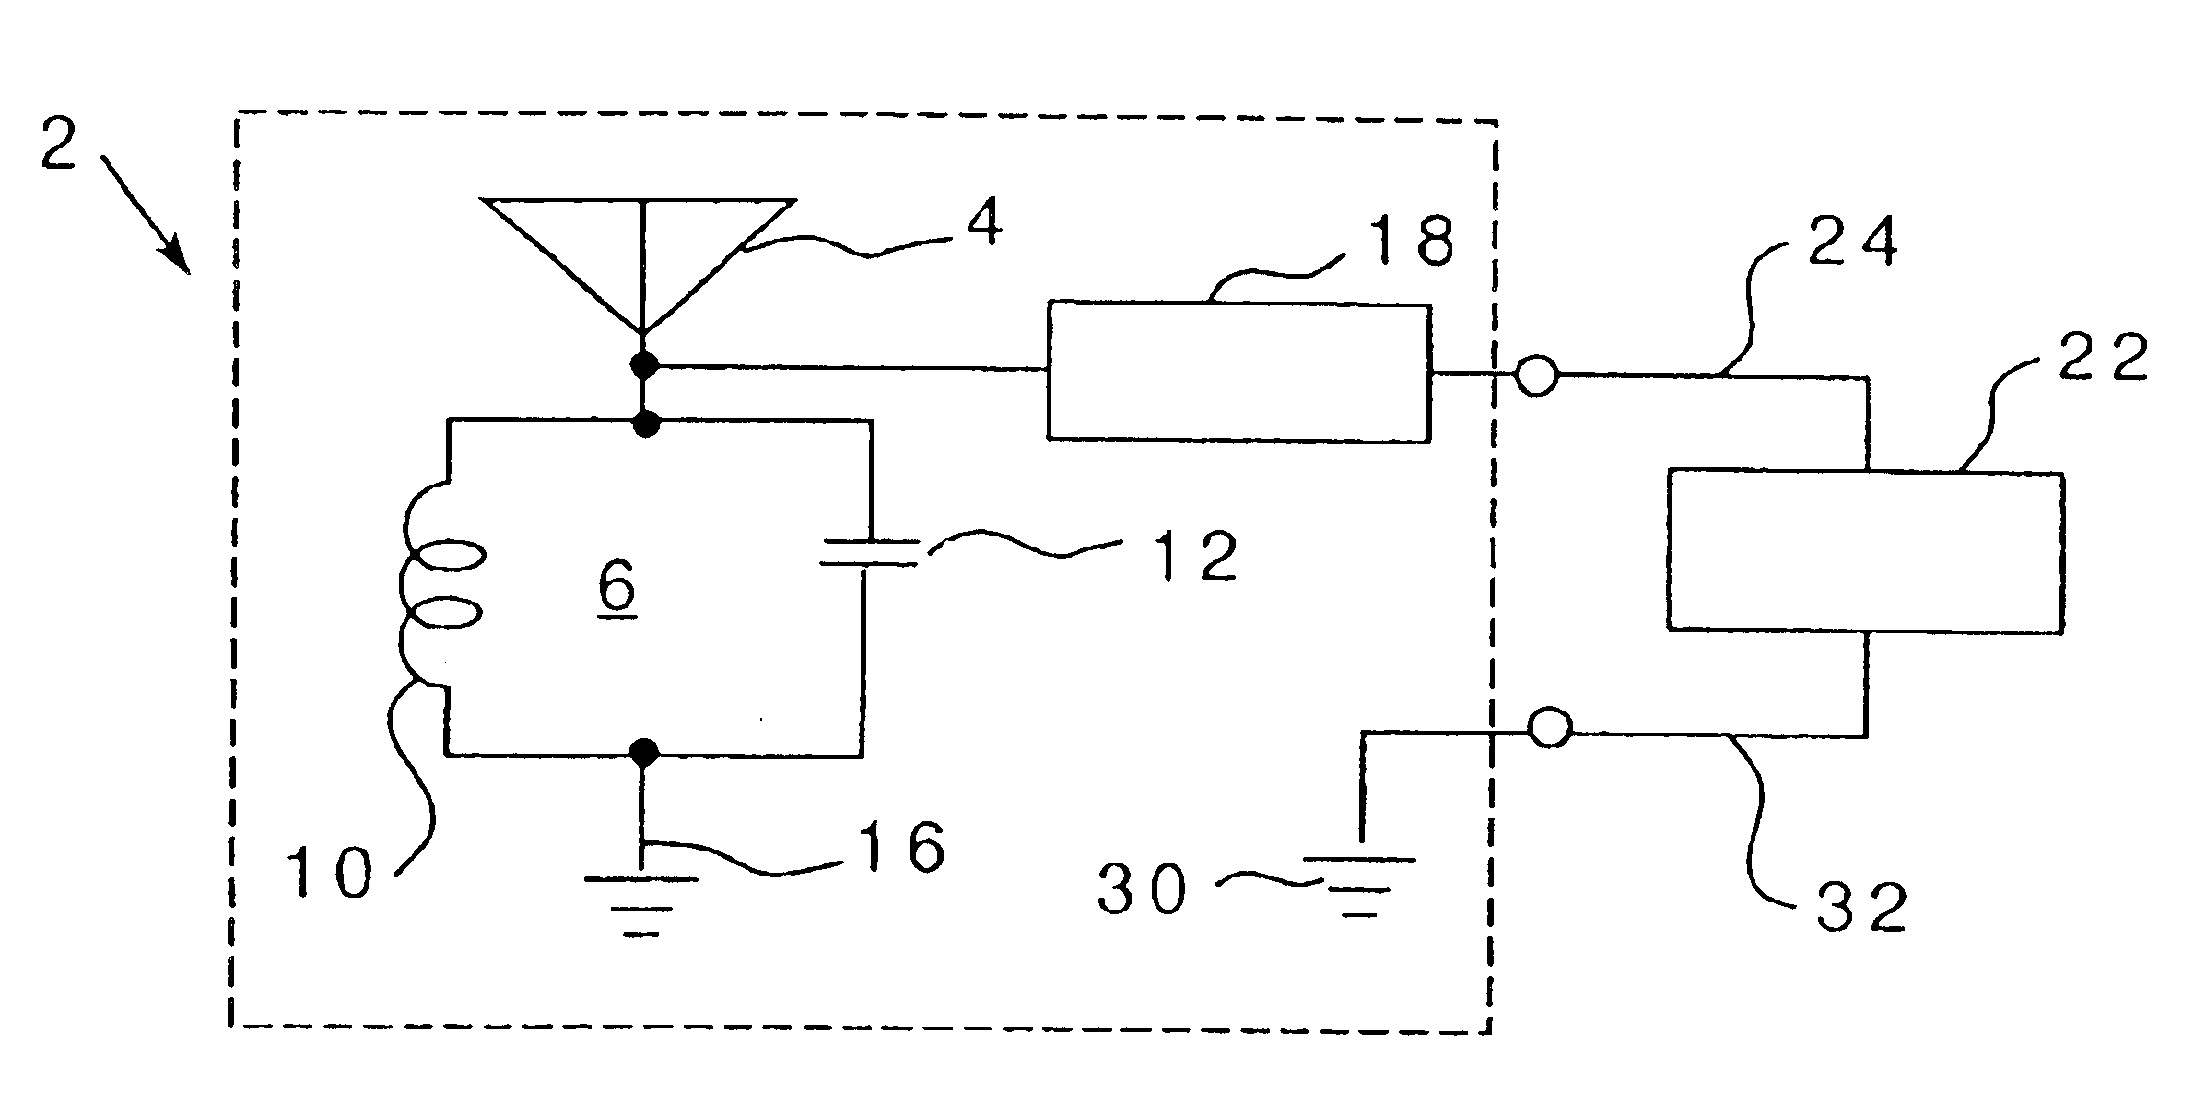 Energy harvesting circuits and associated methods